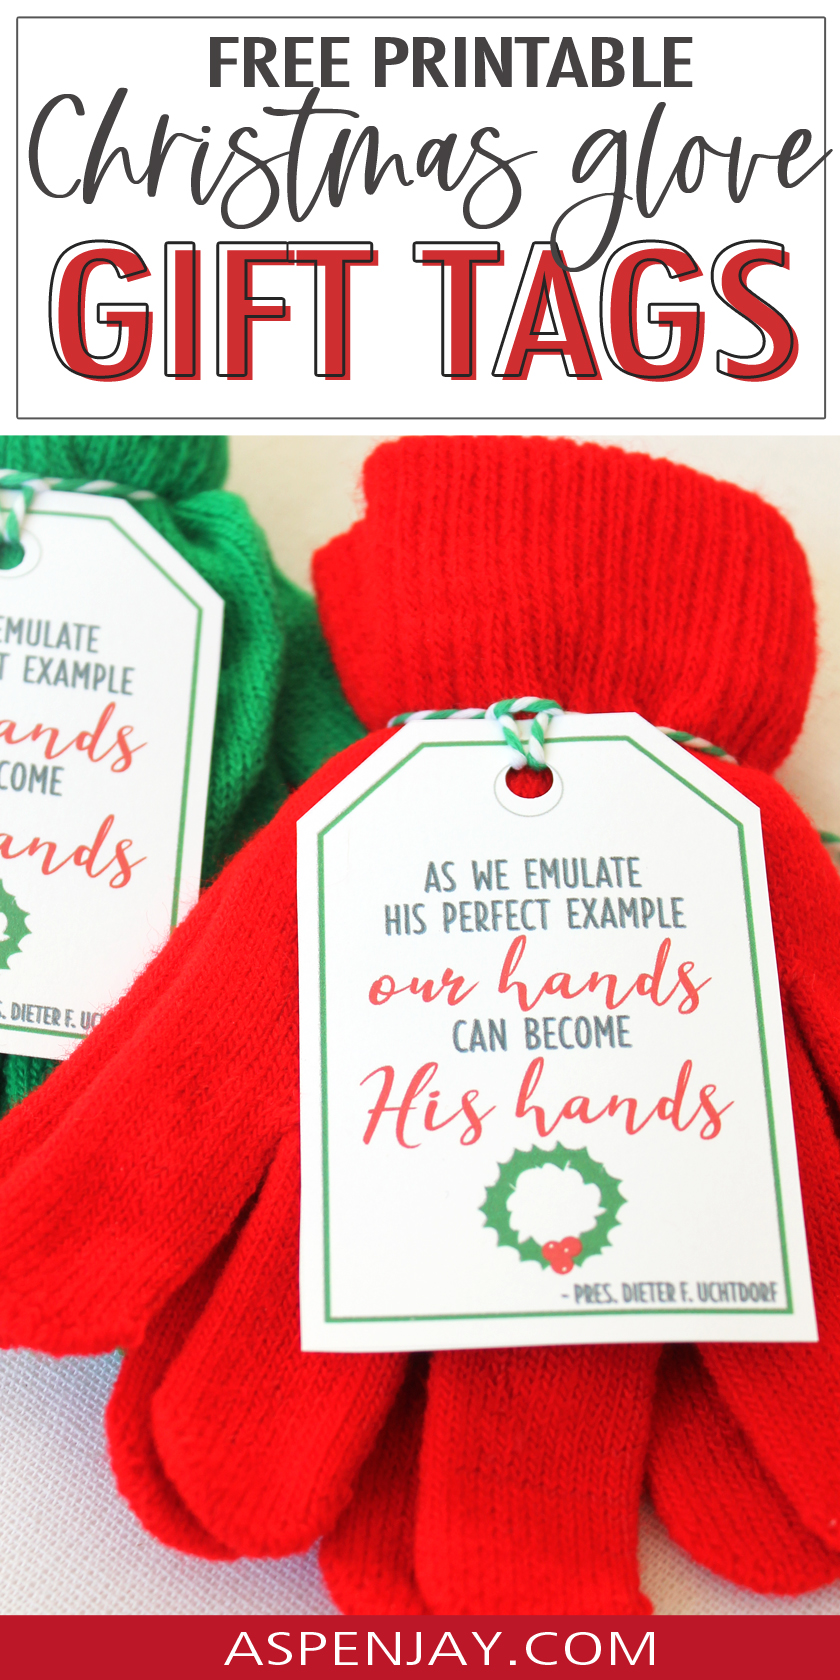 Dress up your gift with these free meaningful Christmas glove gift tags. They are super easy to print and will give a special touch to your gift!